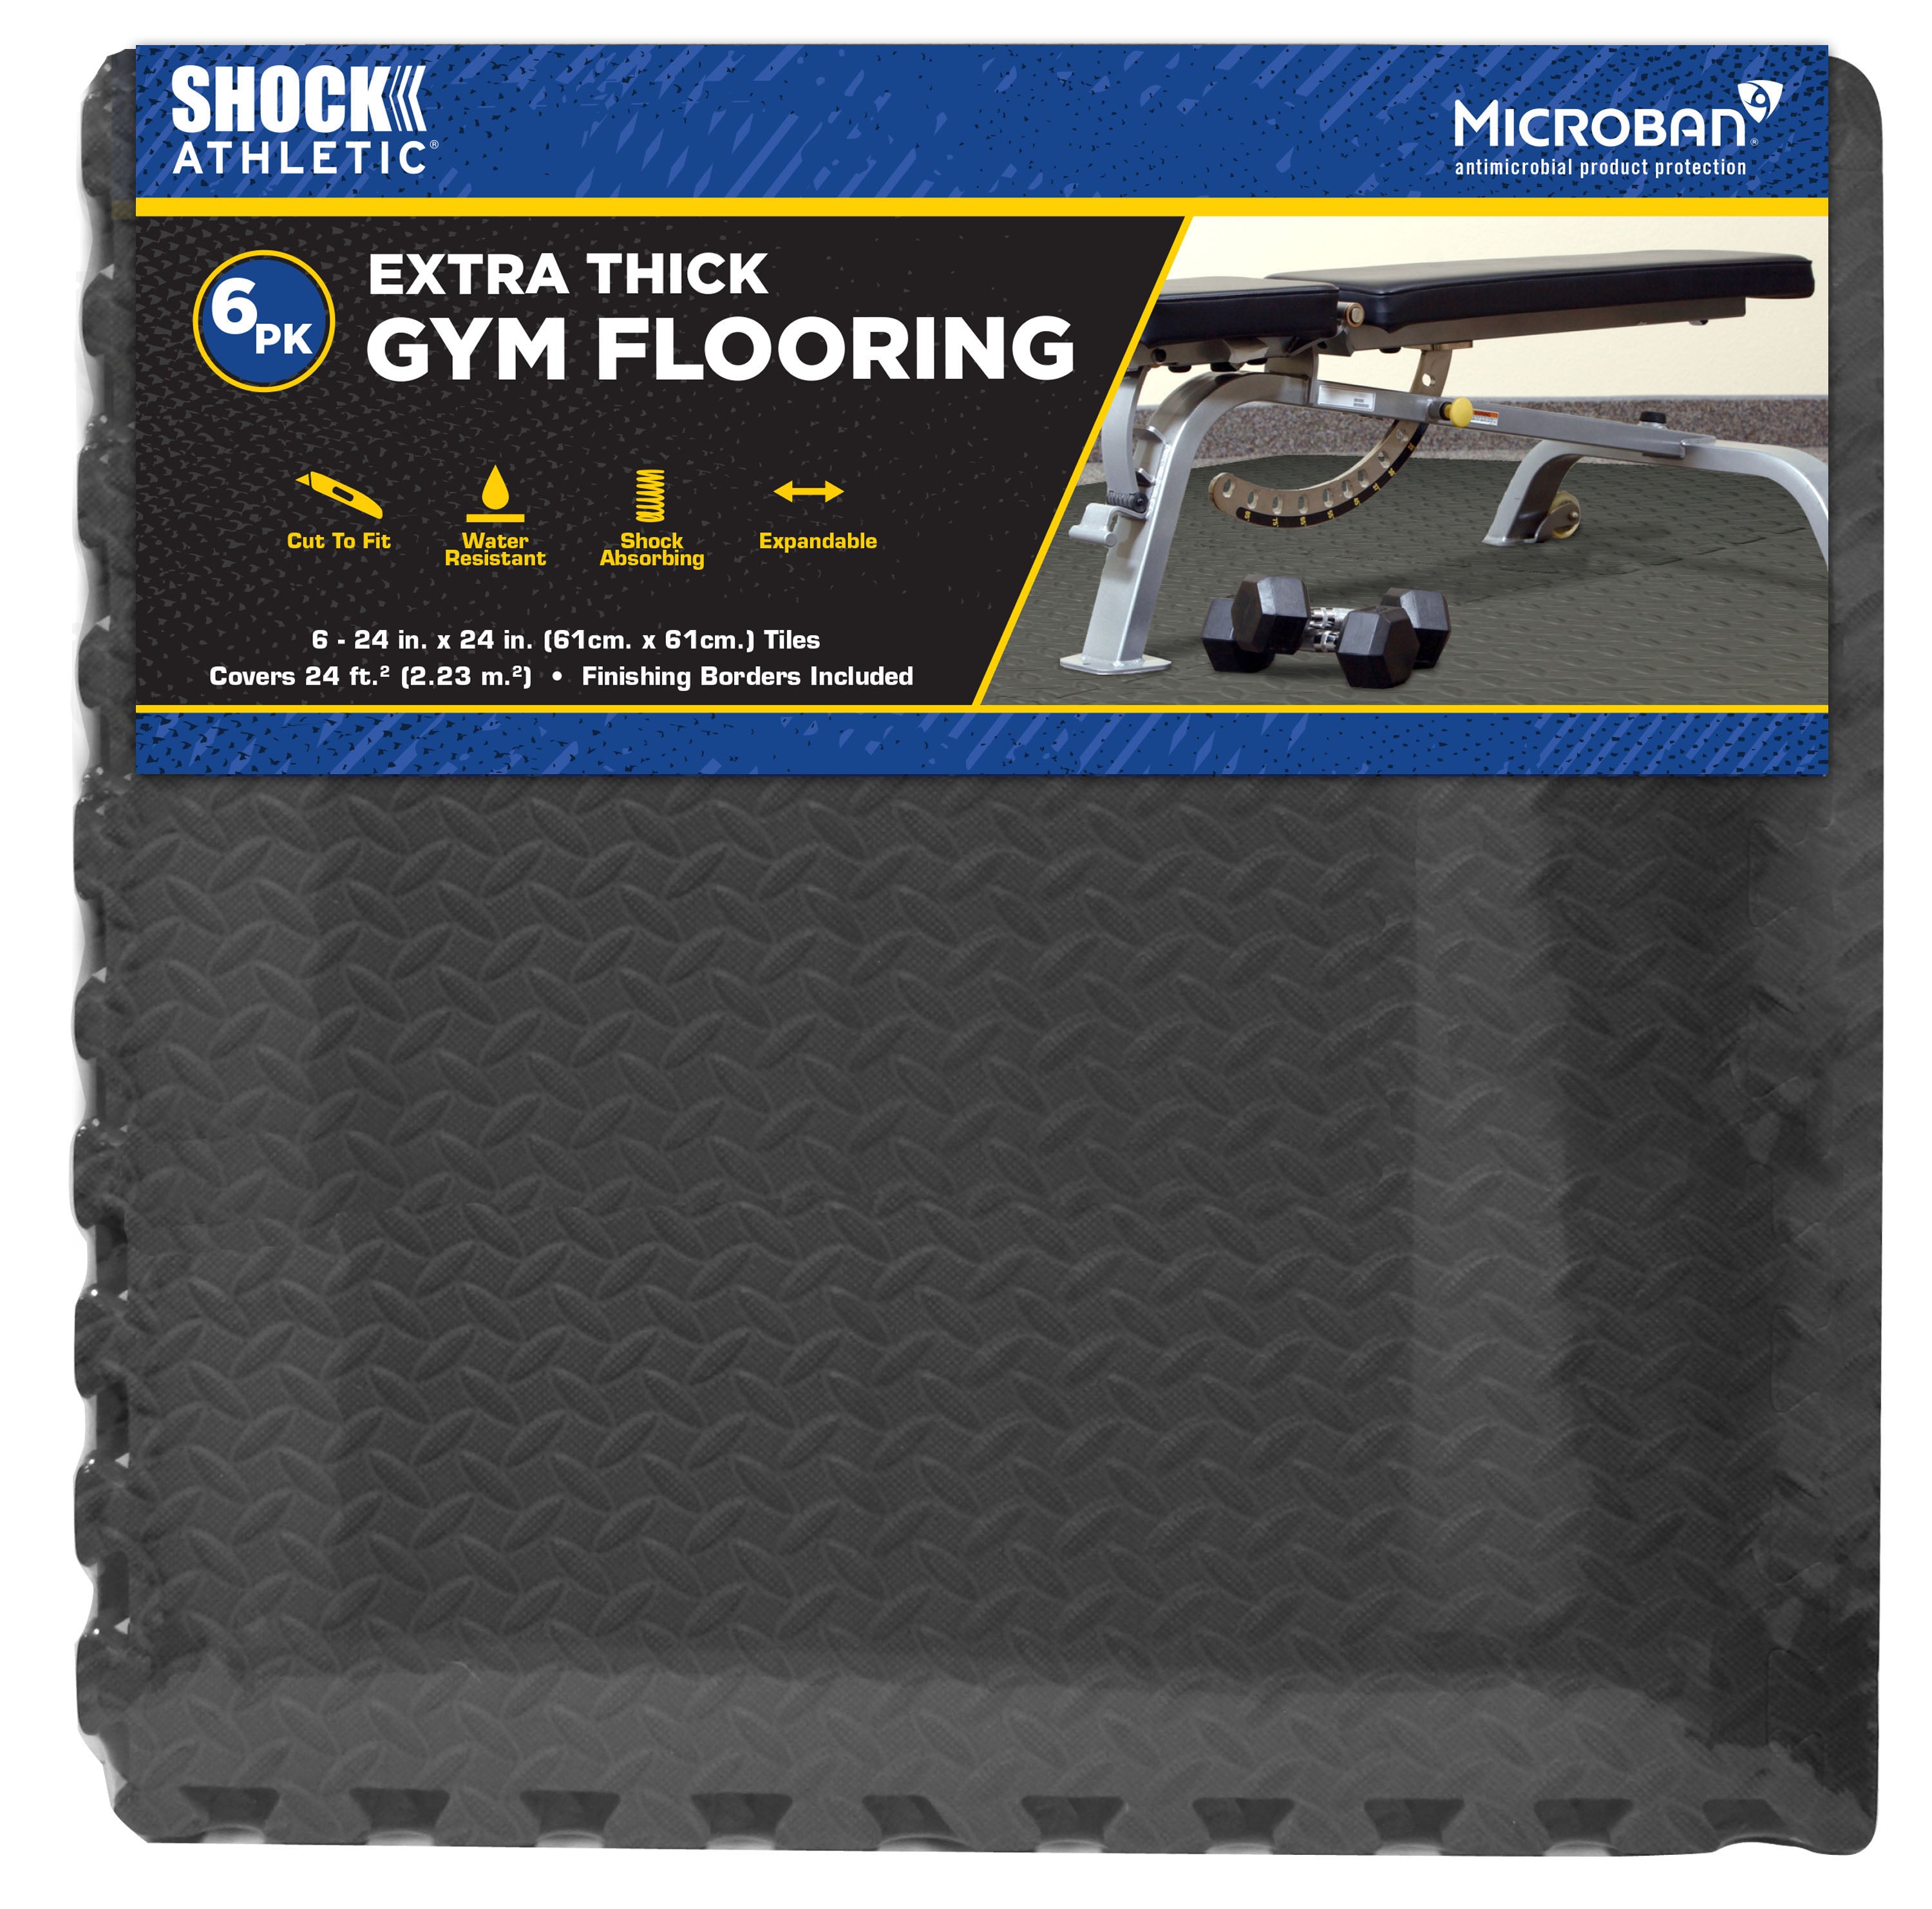 Tumbling Mats for Protection & Shock Absorption